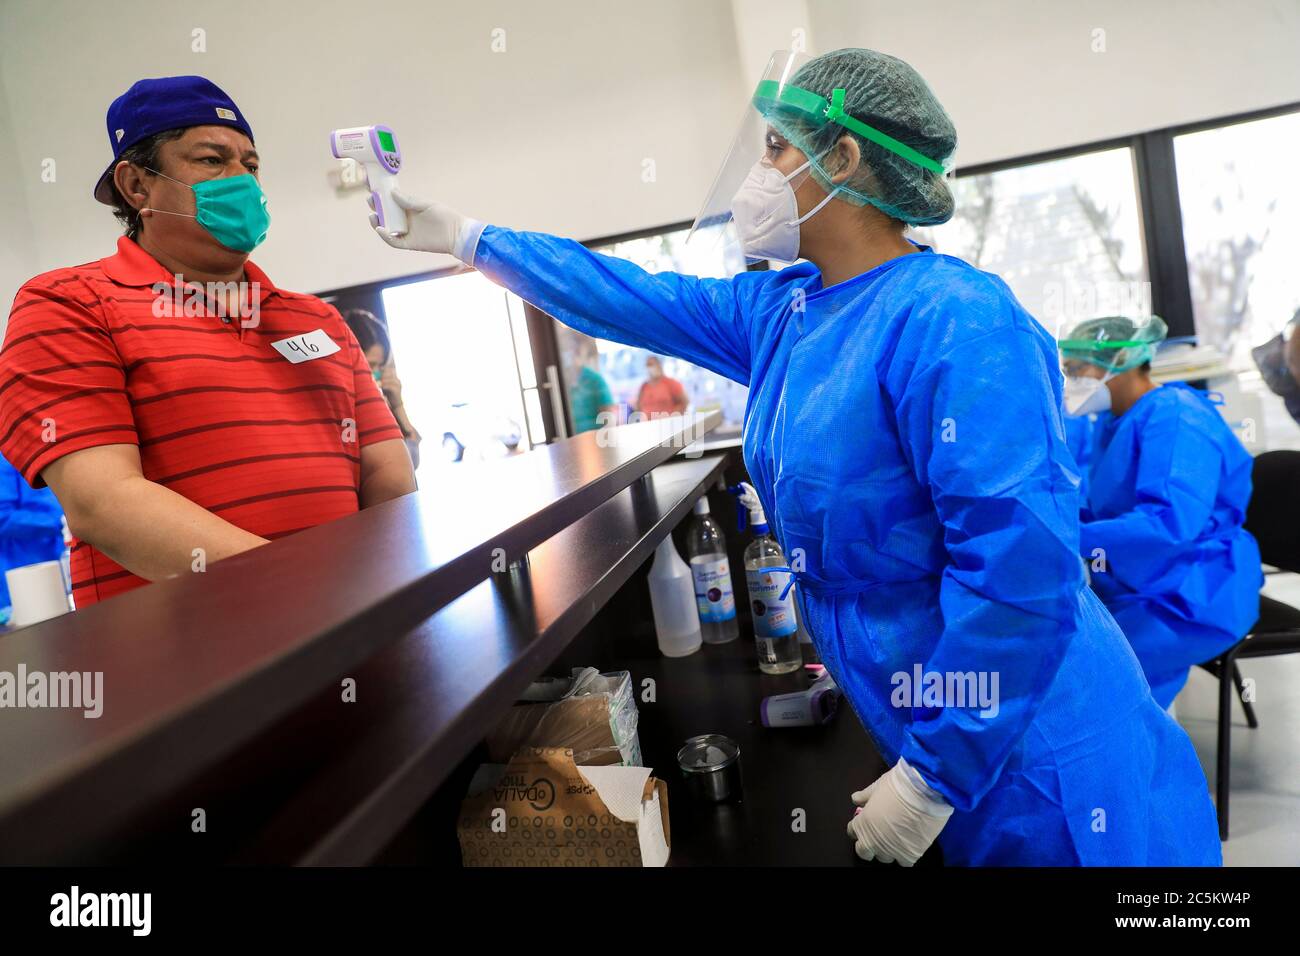 HERMOSILLO, MEXICO - JULY 3: Medical and health personnel carry out rapid tests and follow-up on people who present symptoms of covid-19 in the facilities of the Arena Sonora, which has led to the red alert due to the increase in cases in the state of Sonora on July 3, 2020 in Hermosillo. Thermometer,TermometroMexico. (Luis Gutierrez / Norte Photo /) Oximeter ,Oximetry, Oxixometro,oxigenometro, medir temperatura HERMOSILLO, MEXICO - JULY 3: Medical and health personnel carry out rapid tests and follow-up on people who present symptoms of covid-19 in the facilities of the Arena Sonora, which ha Stock Photo